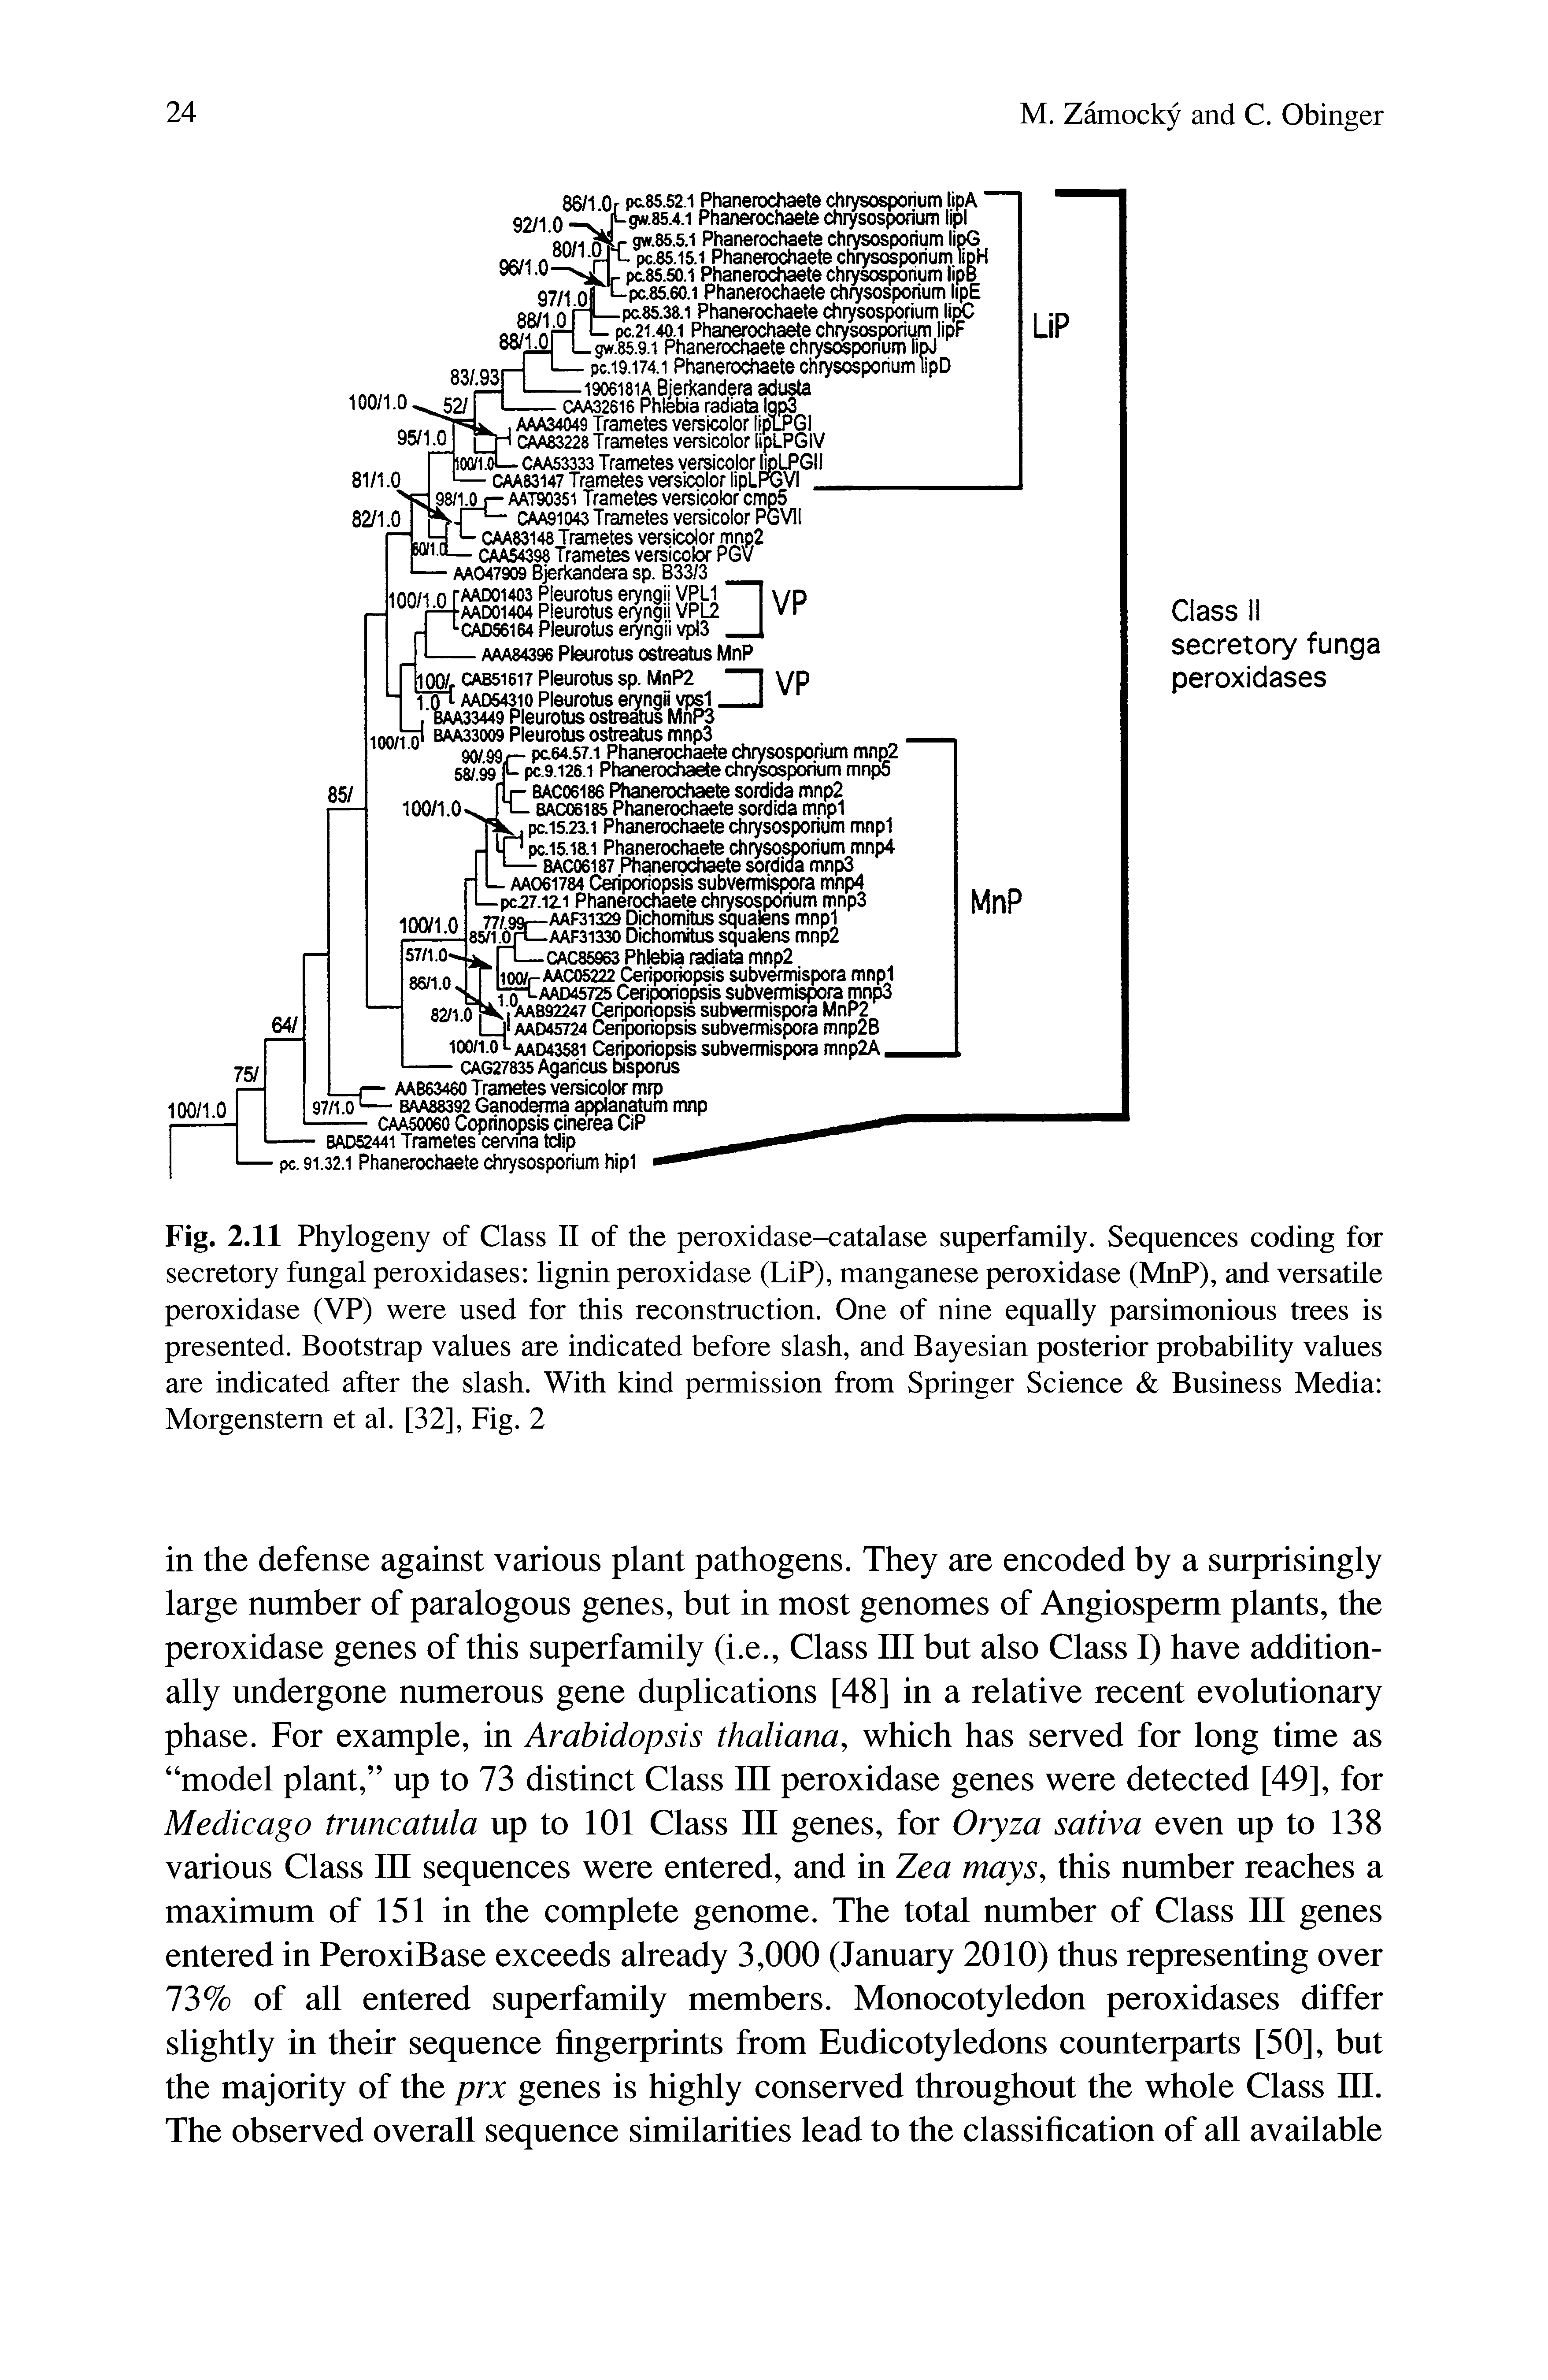 Fig. 2.11 Phylogeny of Class II of the peroxidase-catalase superfamily. Sequences coding for secretory fungal peroxidases lignin peroxidase (LiP), manganese peroxidase (MnP), and versatile peroxidase (VP) were used for this reconstruction. One of nine equally parsimonious trees is presented. Bootstrap values are indicated before slash, and Bayesian posterior probability values are indicated after the slash. With kind permission from Springer Science Business Media Morgenstem et al. [32], Fig. 2...